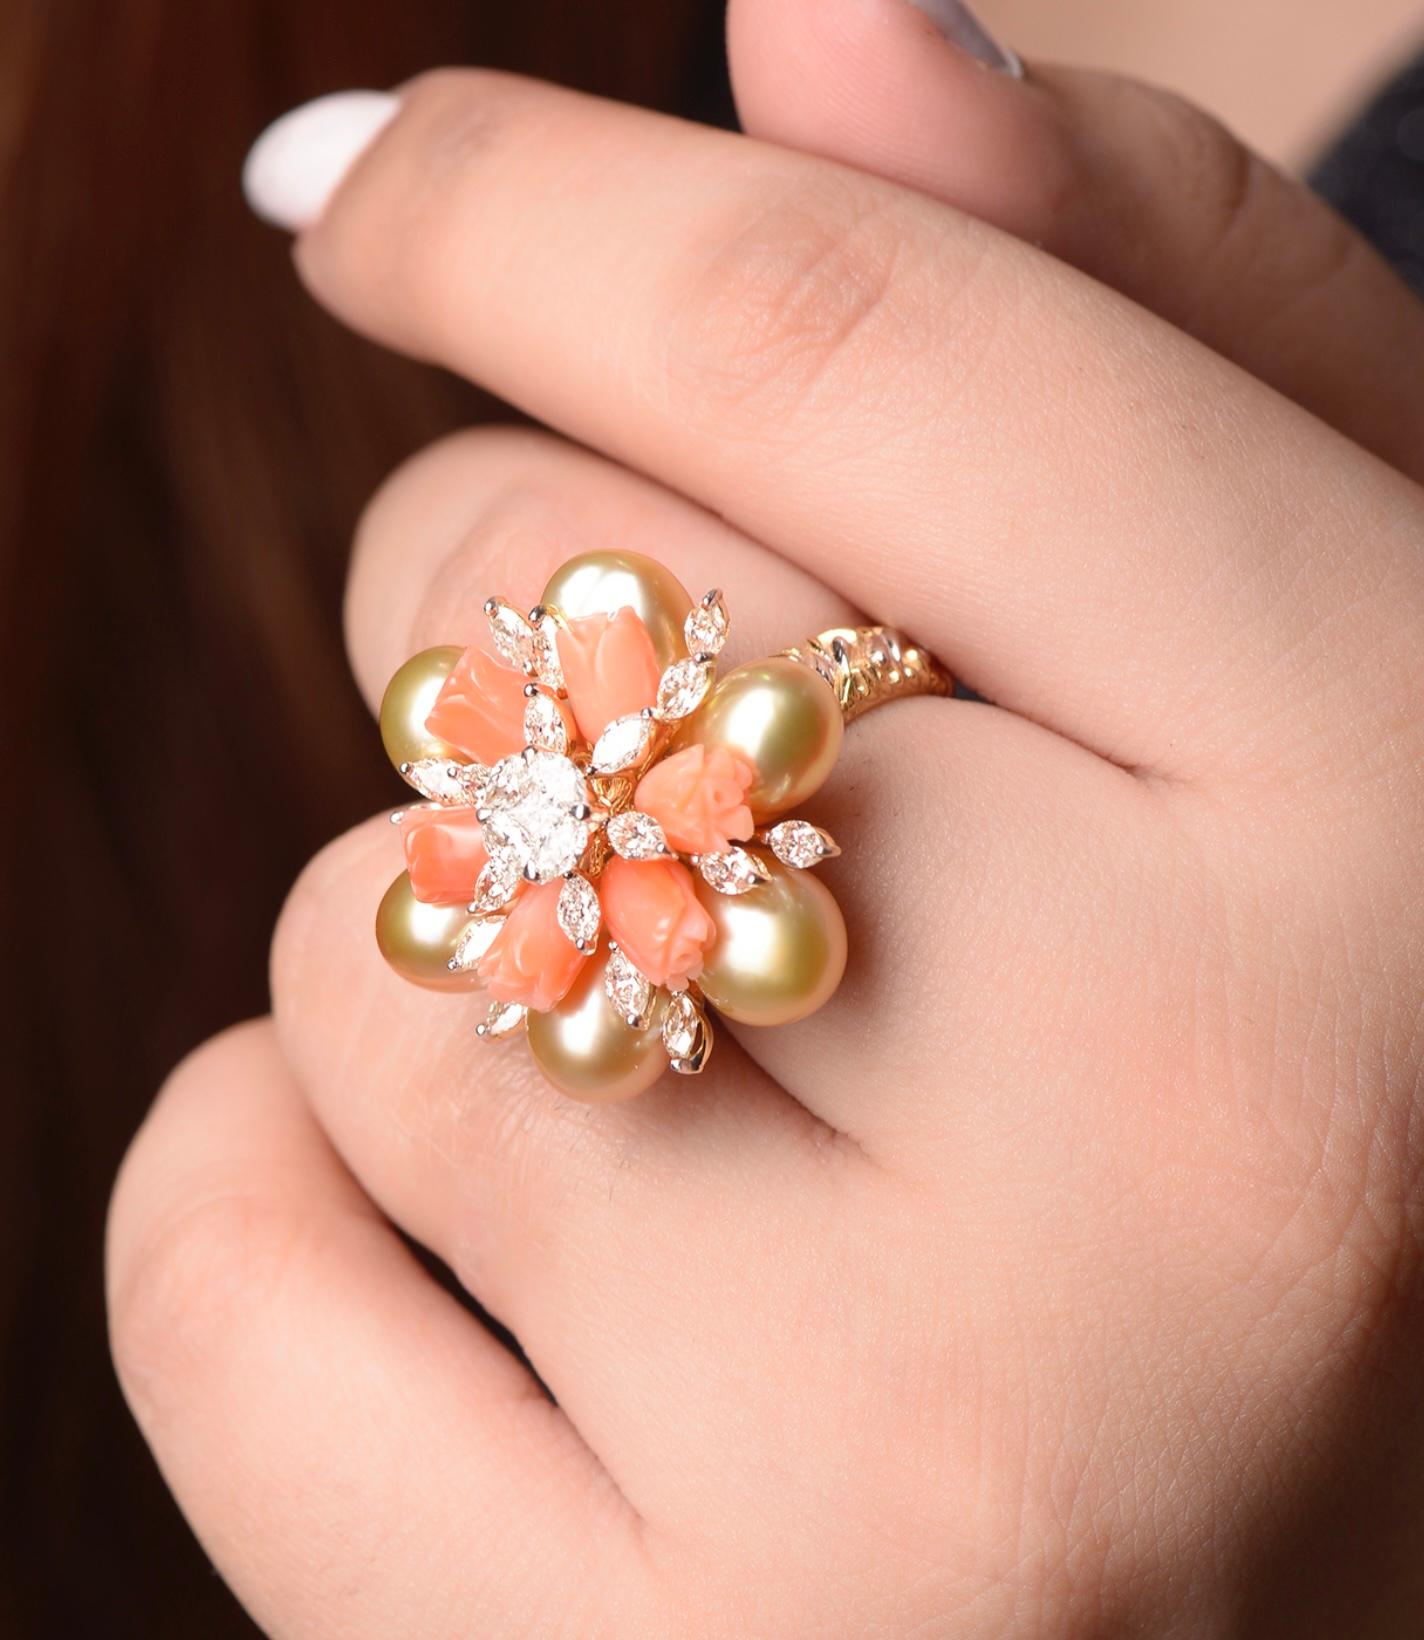 18k diamond Ring with Coral Tulips and keshi Pearls 